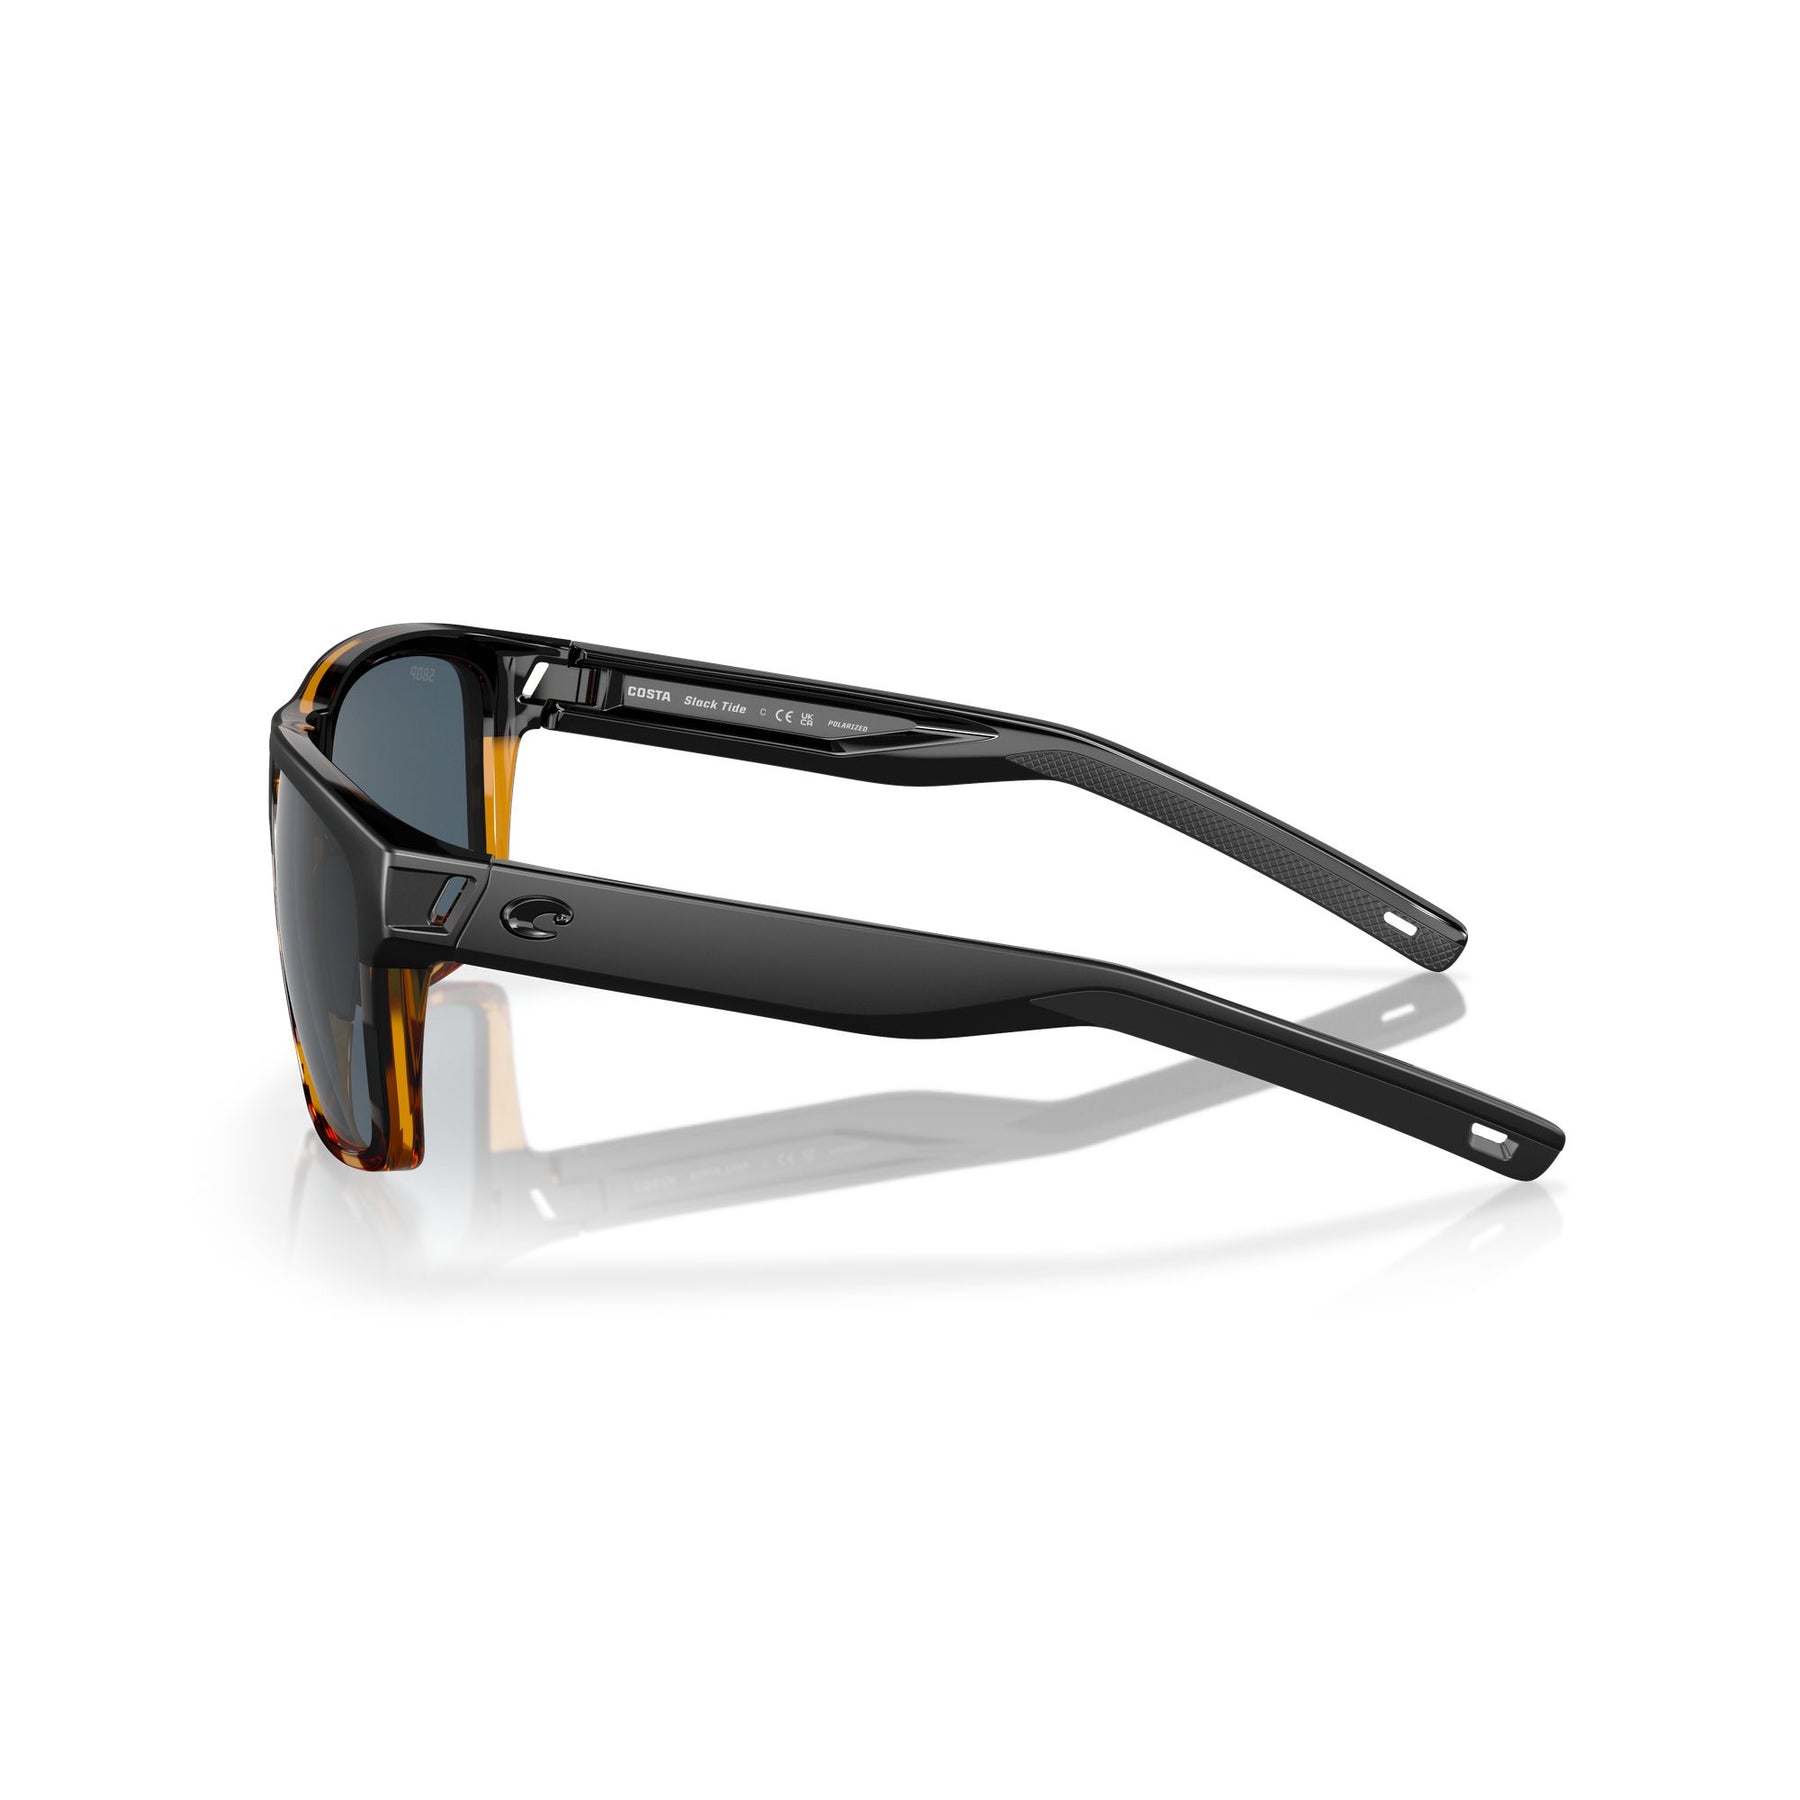 View of Sunglasses Costa Slack Tide Matte Black / Shiny Tortoise Gray 580P available at EZOKO Pike and Musky Shop